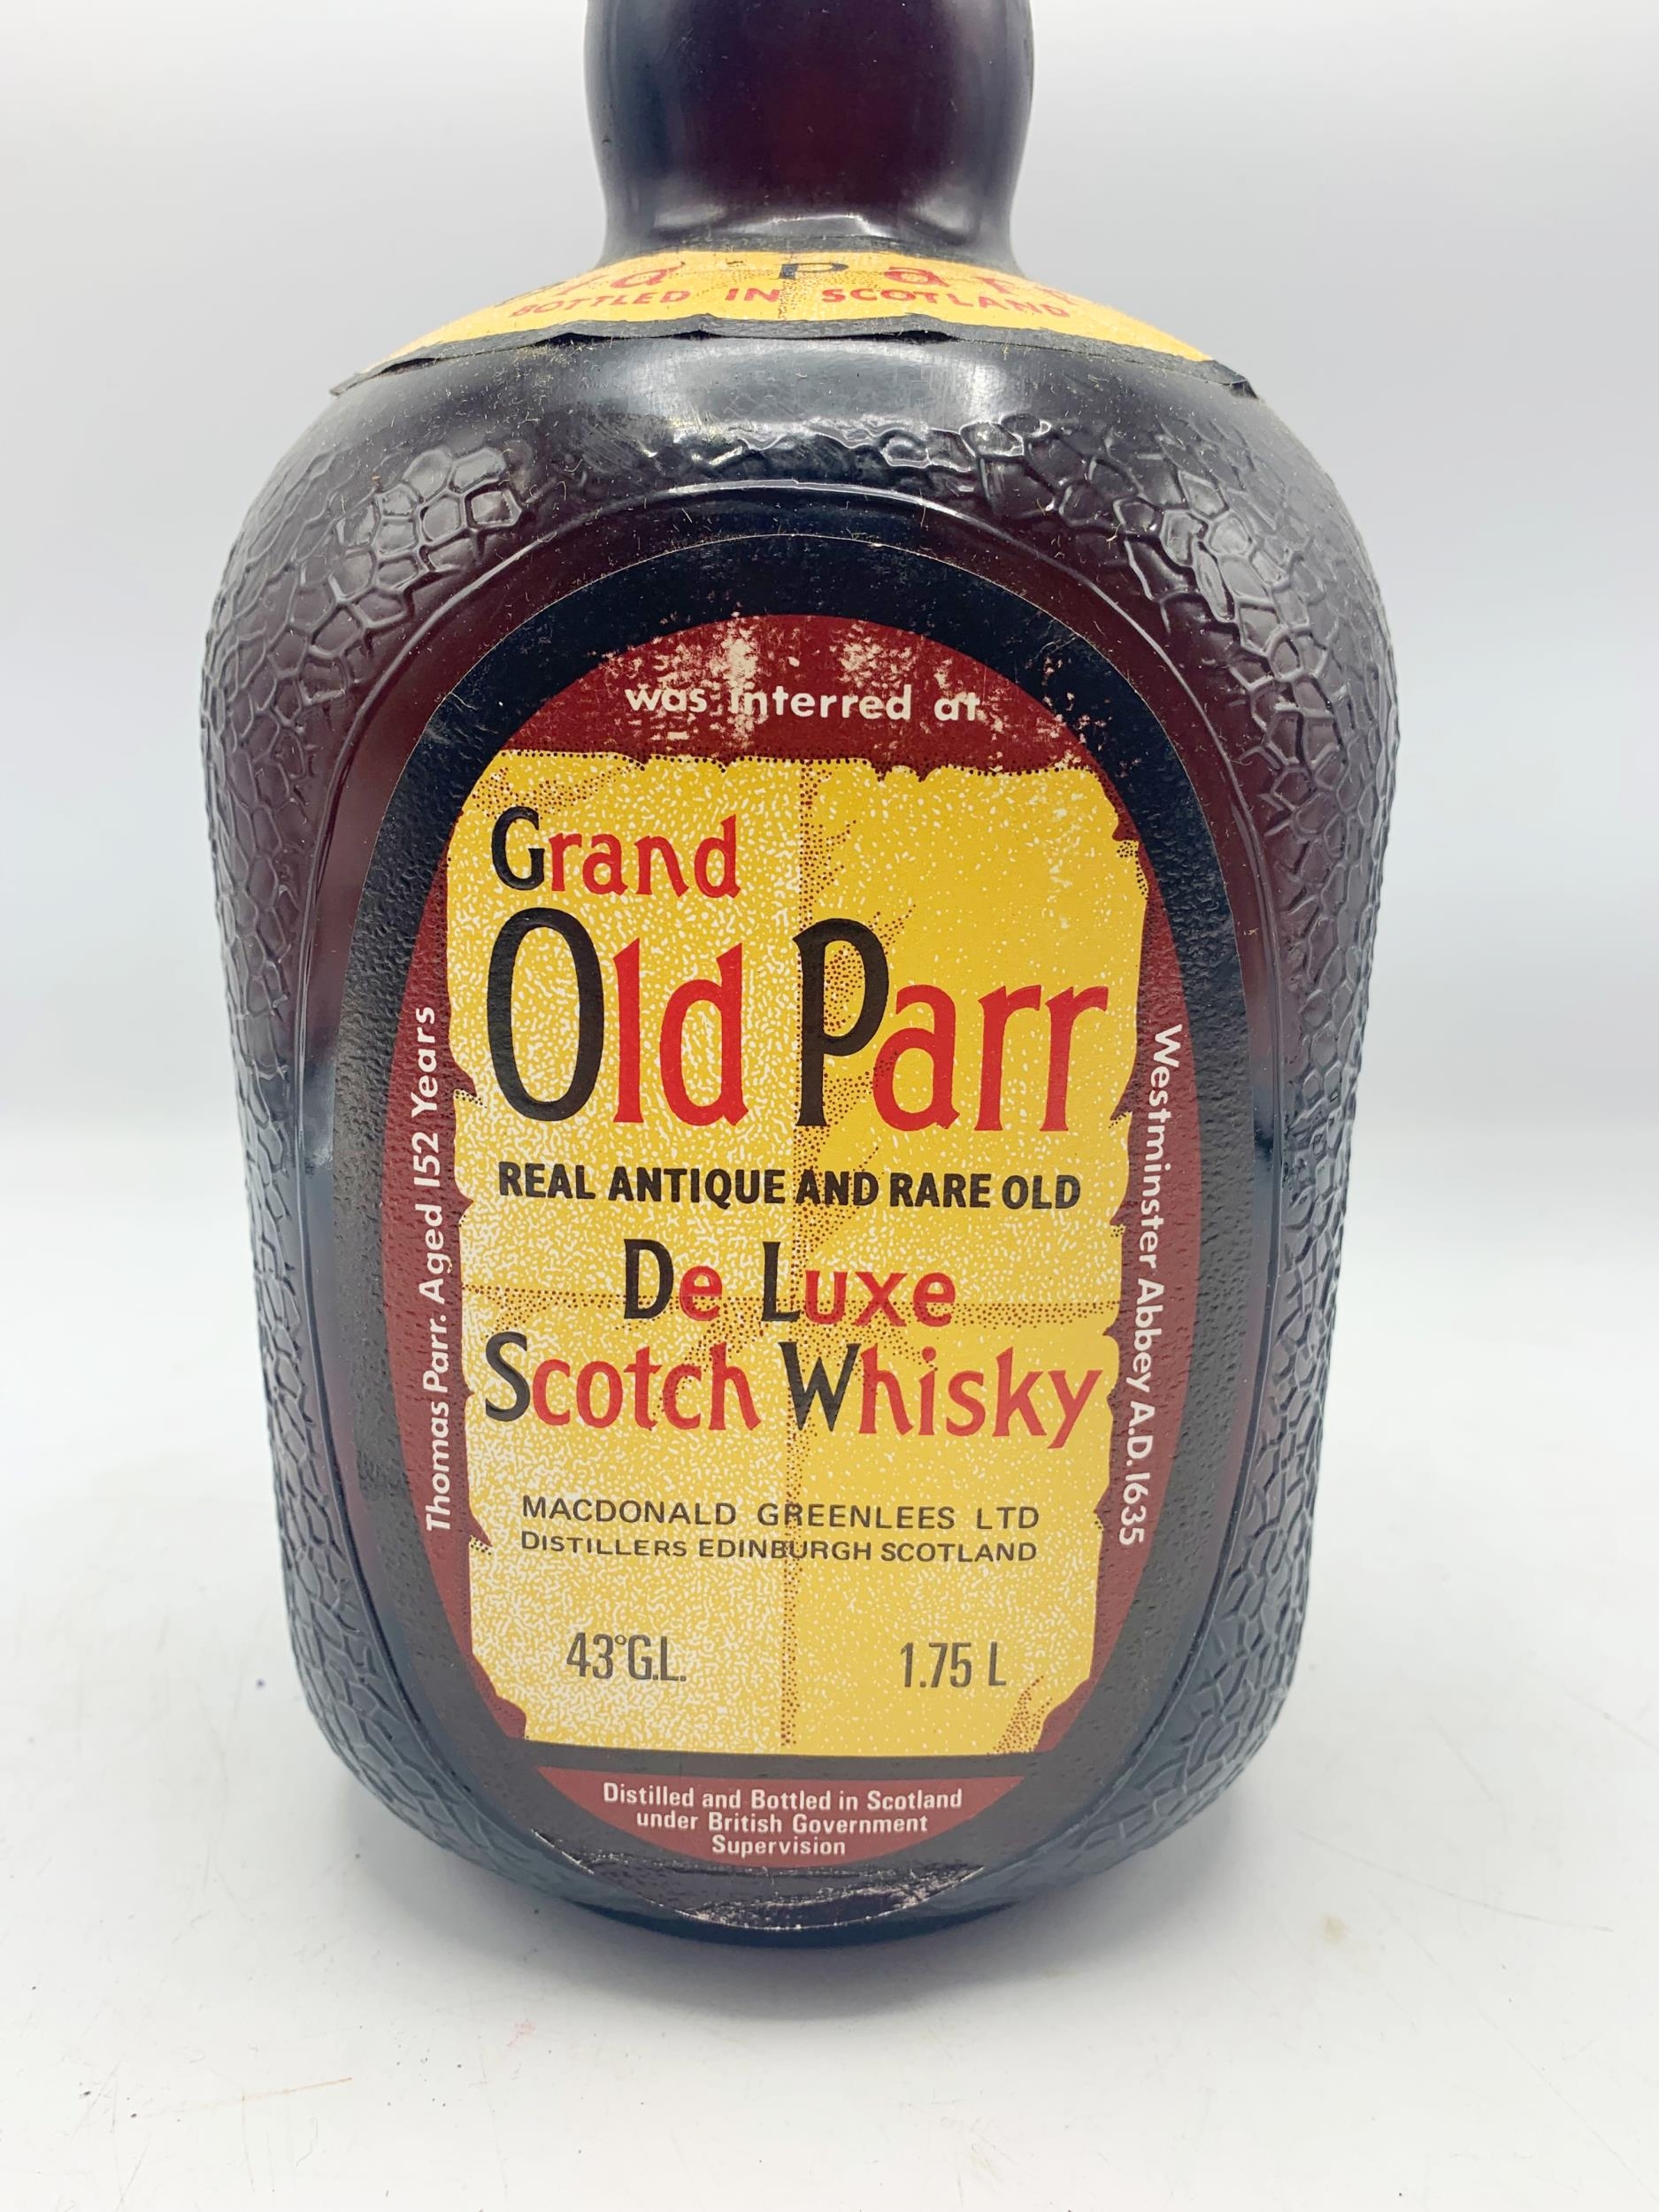 Boxed Grand Old Parr De Luxe Scotch Whisky. Unopened. - Image 3 of 4